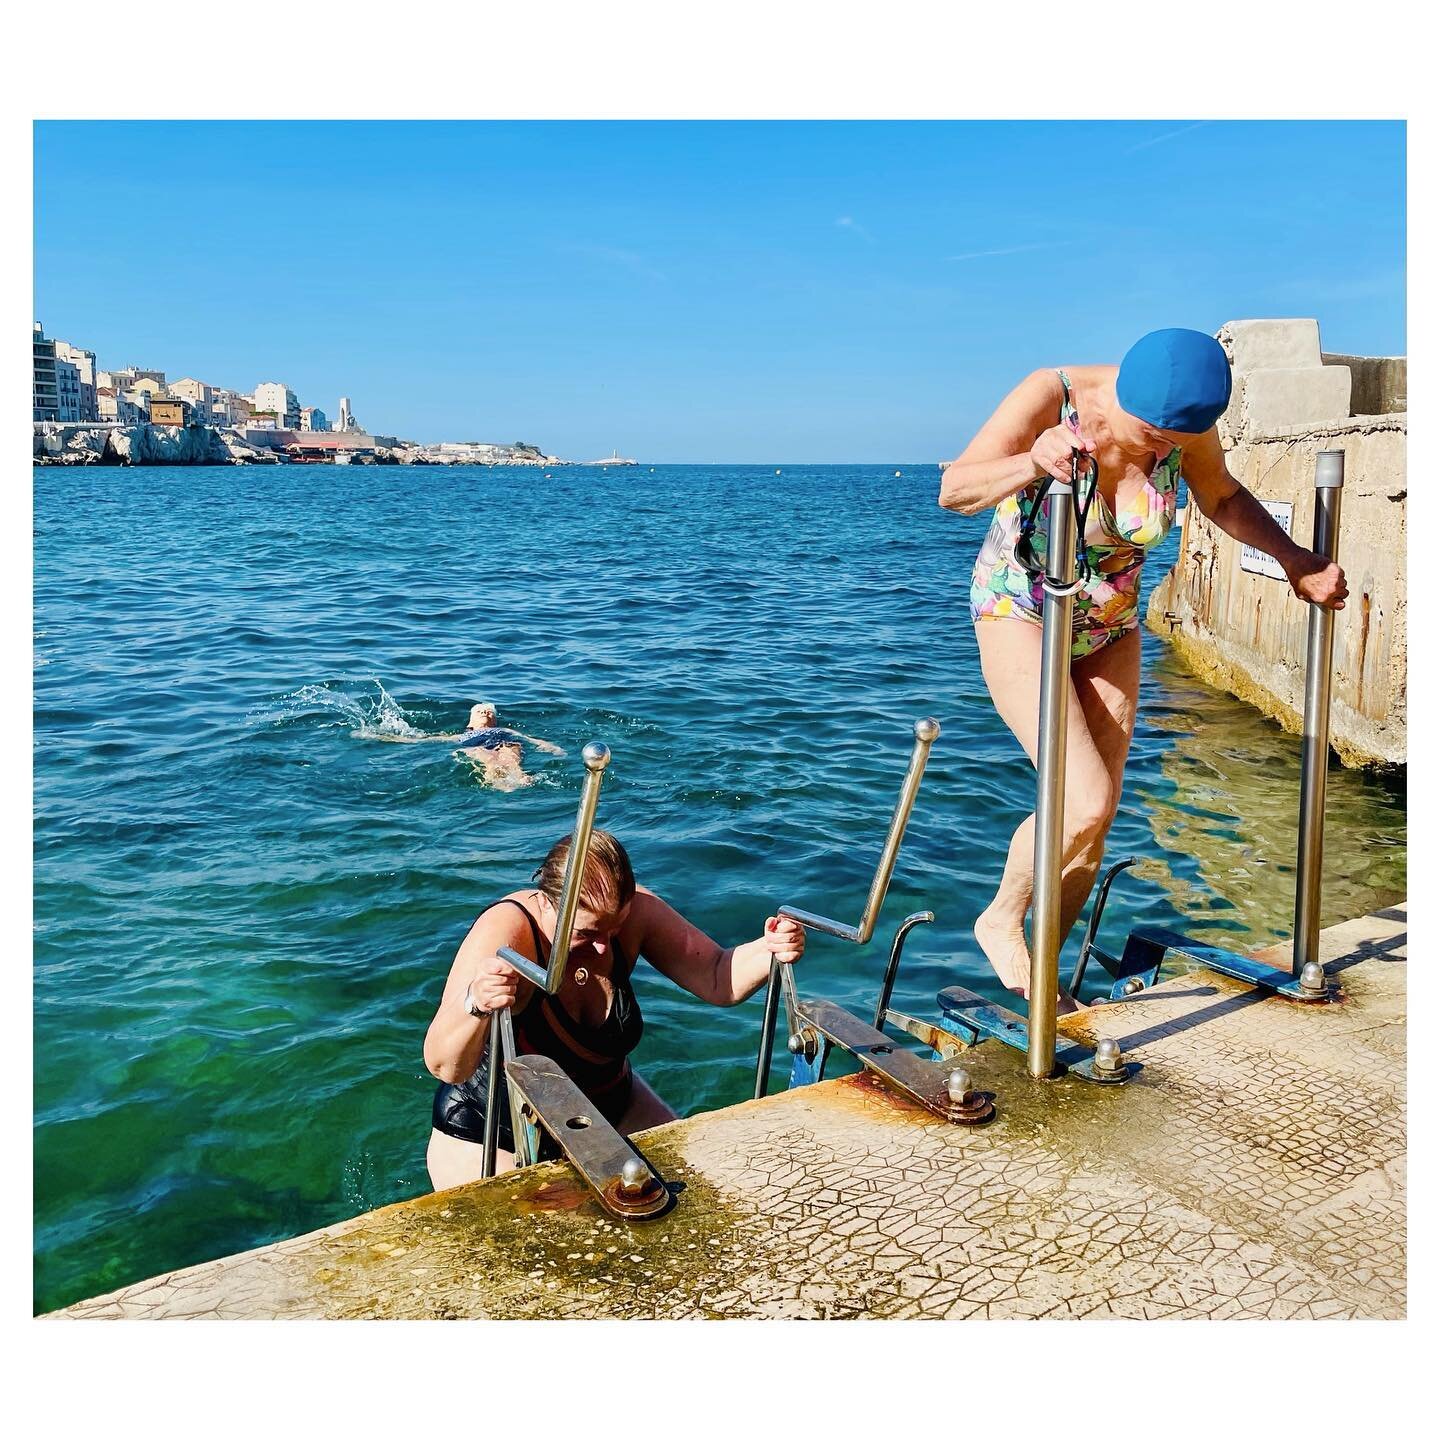 SE METTRE &Agrave; L&rsquo;EAU 
.
.
.
#swimming_time #concrete #swimming #peoplephotography #summervibes #summerlife #staircase #shadesofblue #shadesofmagic #mediterraneansea #mediterraneanlife #sealovers #seaview #swimmer #mediterranean #swimmingtim